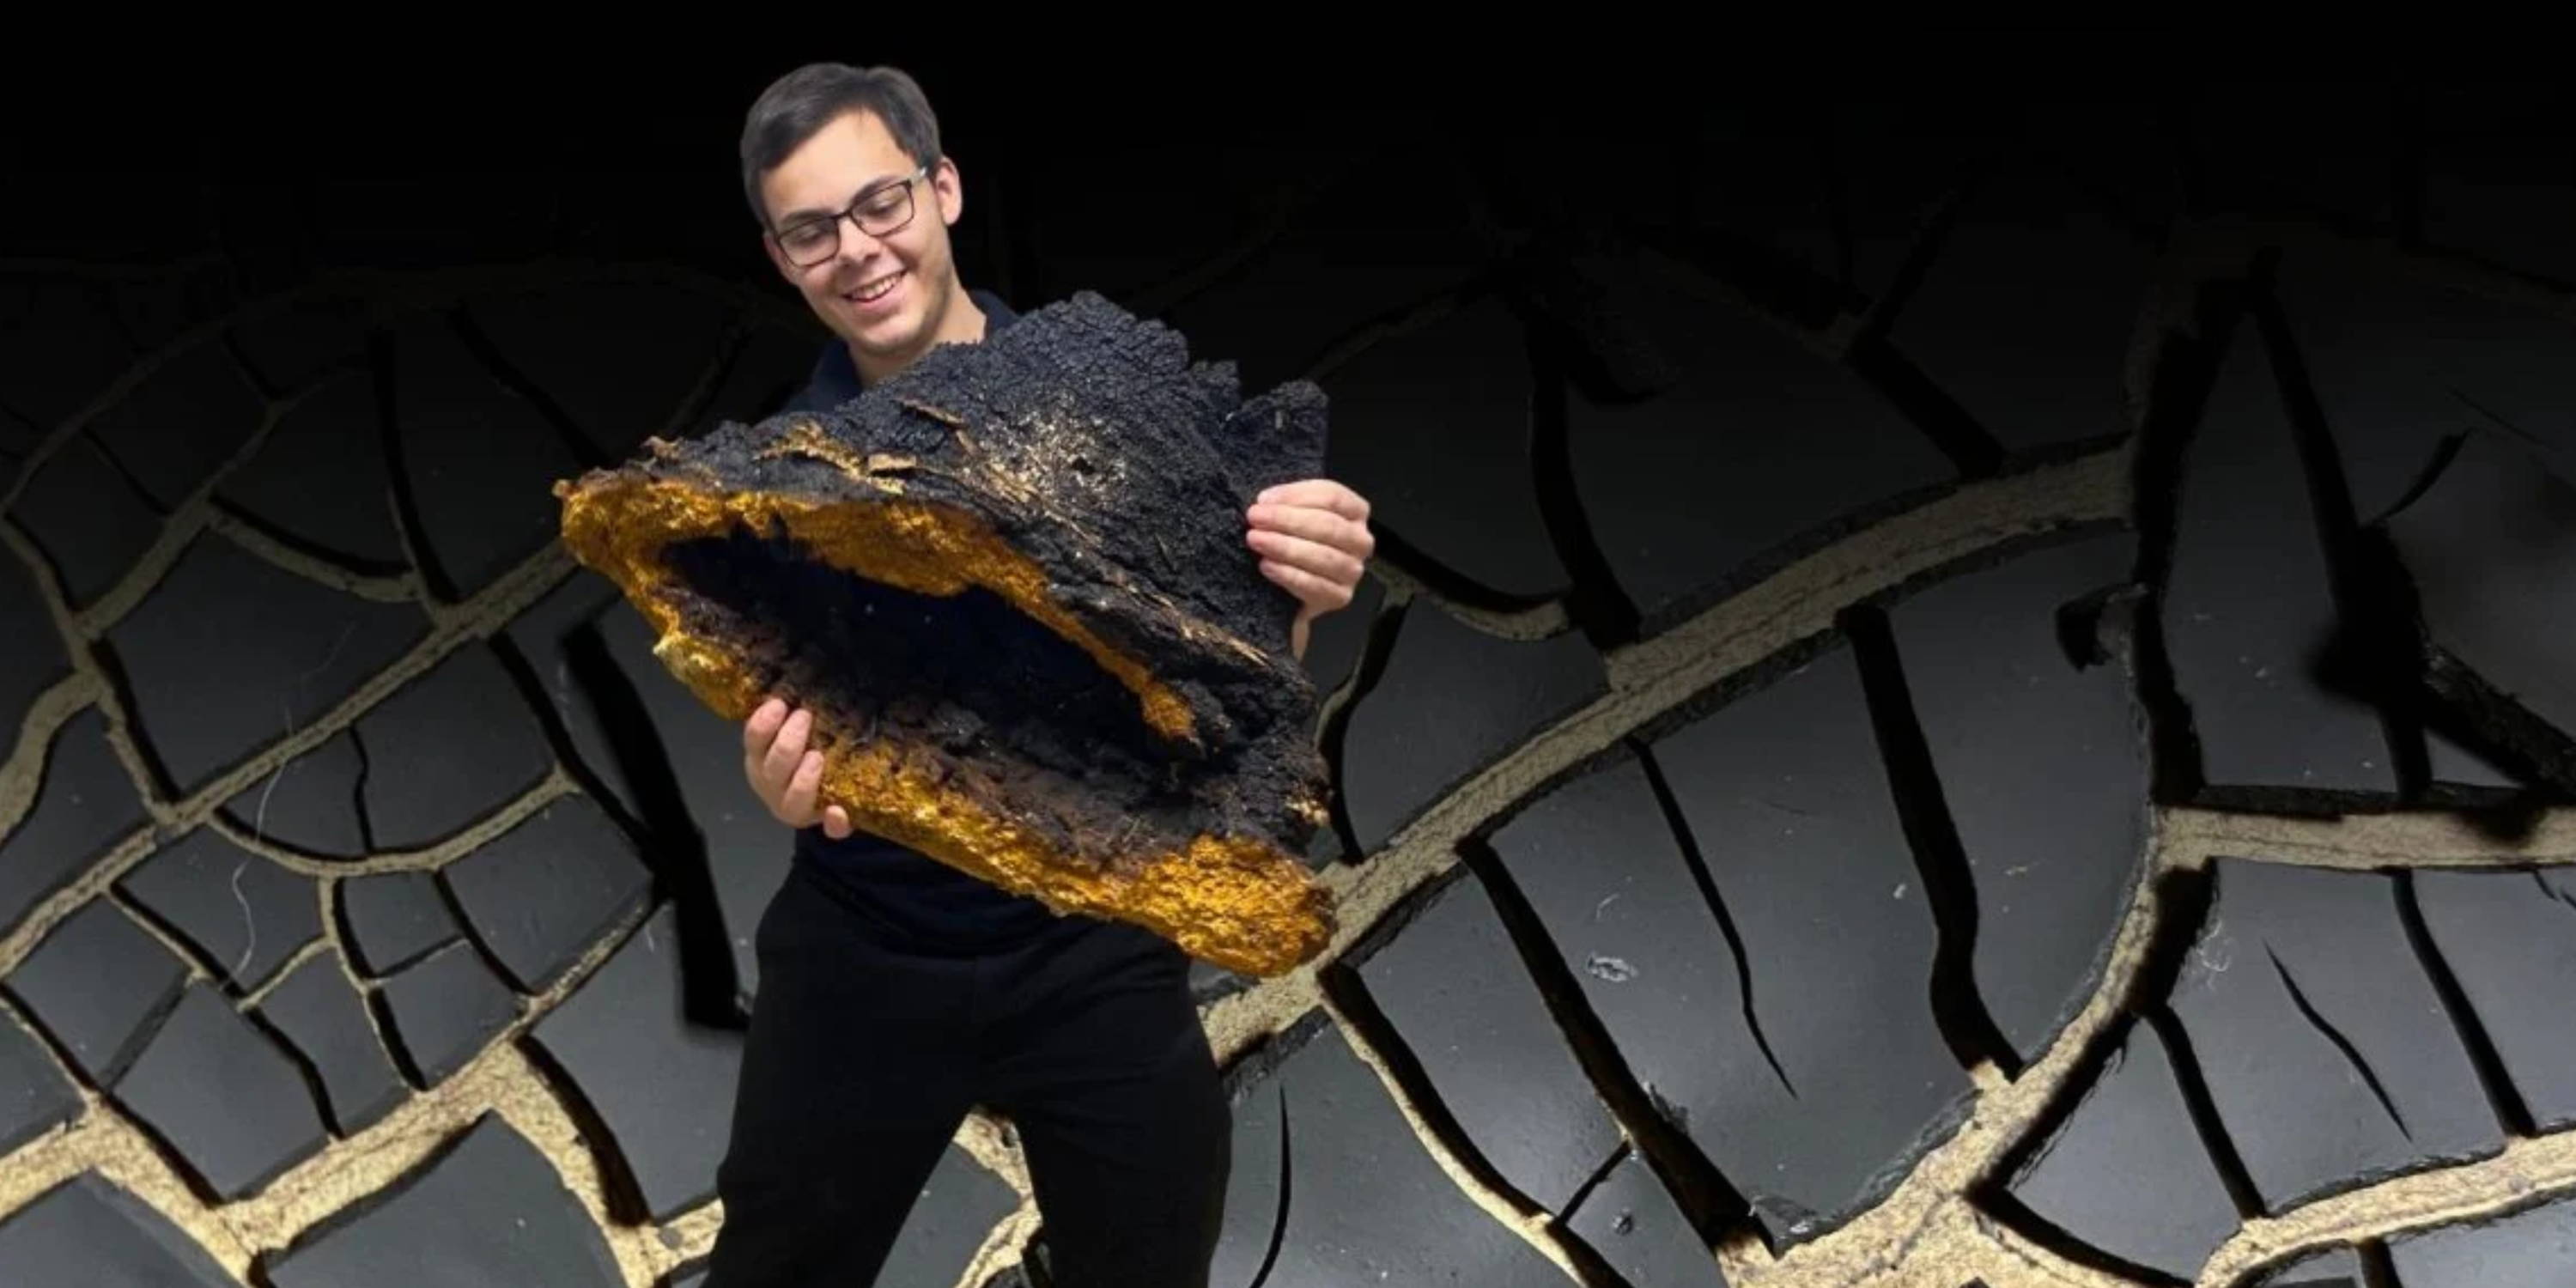 Birch Boys Company President holding a massive conk of chaga sclerotia, behind lies flakes of fungal melanin